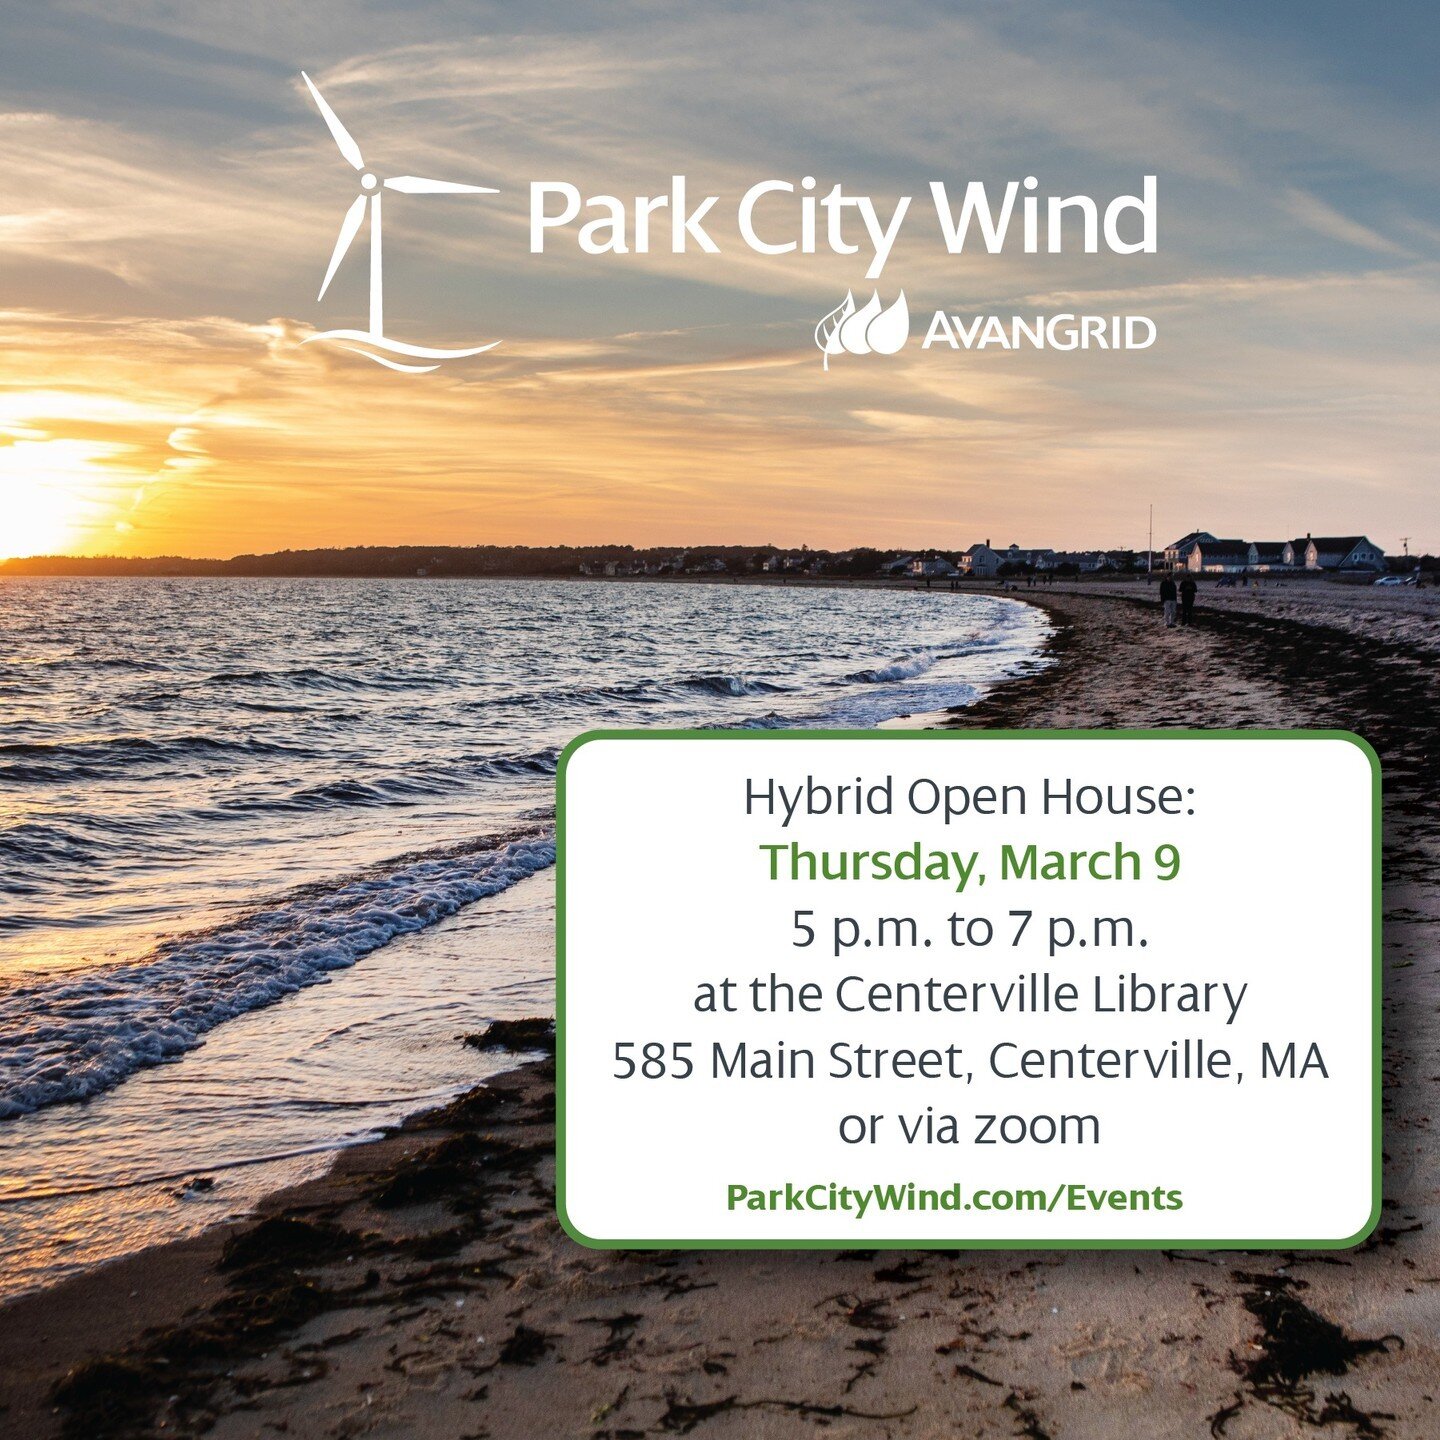 #Reminder: We are hosting a hybrid #OpenHouse tonight to provide an overview of AVANGRID&rsquo;s work in Barnstable and the Park City Wind project. Please join us tonight at 5pm at the Centerville Library, 585 Main Street Centerville, MA, or via Zoom